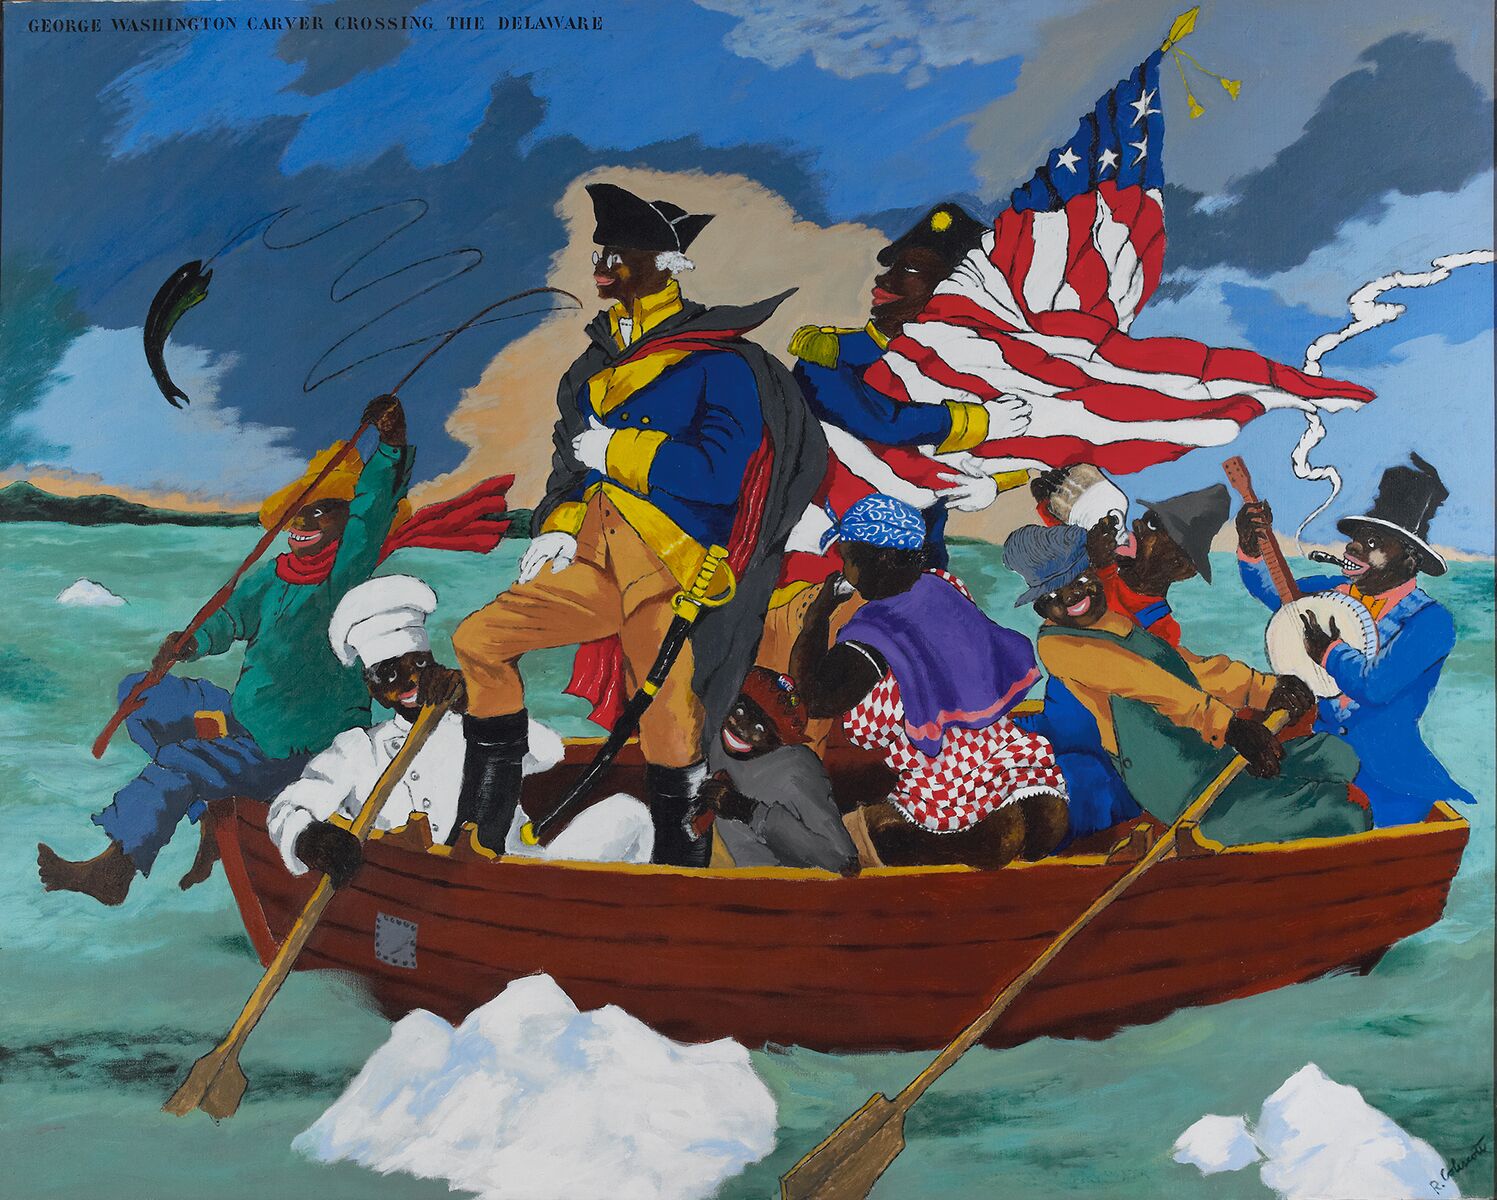 George Washington Carver Crossing the Delaware: Page from an American History Textbook, 1975, Robert Colescott